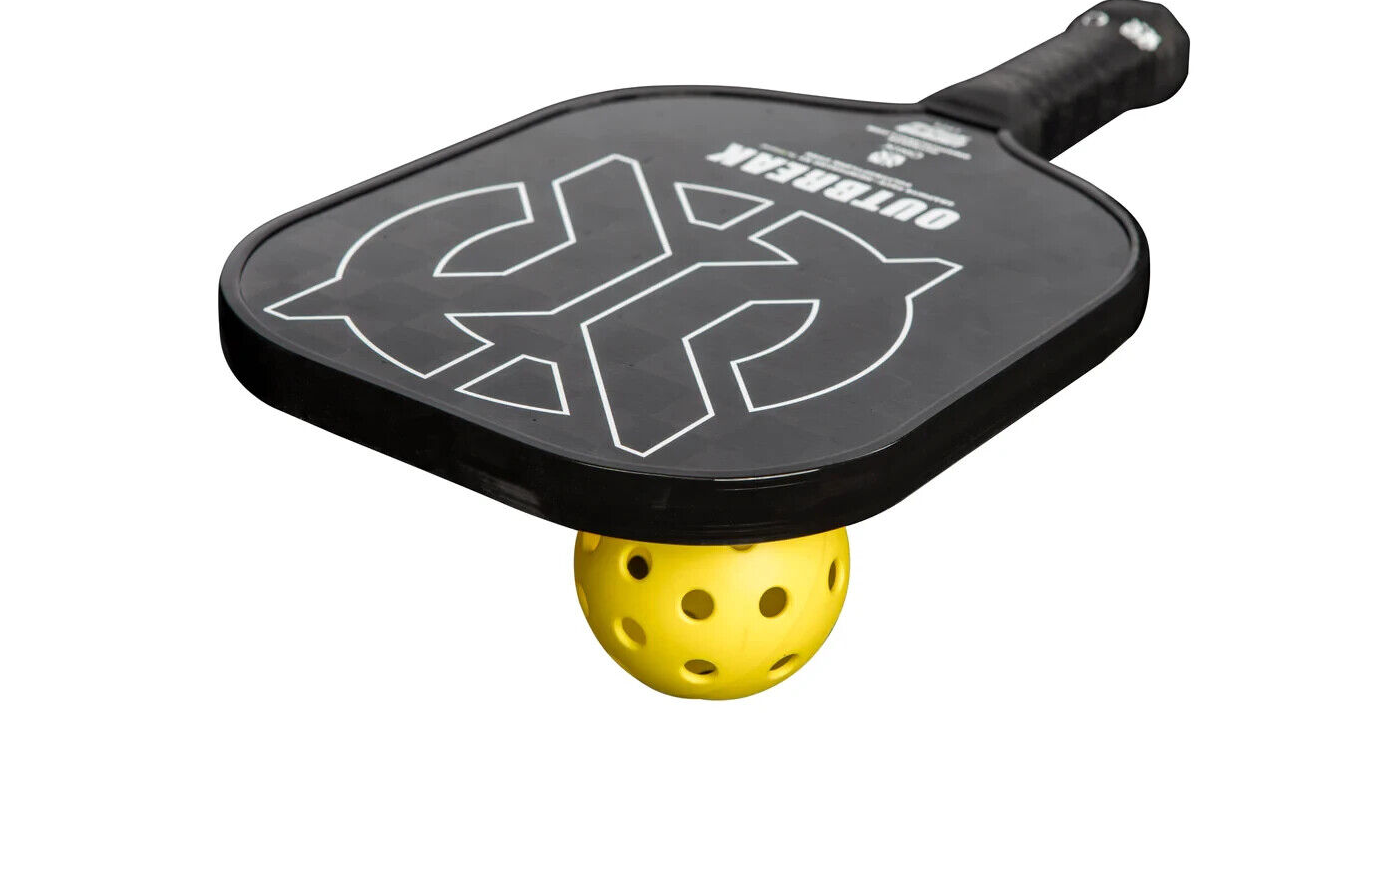 Onix Pickleball releases the all new OUTBREAK paddle with TeXtreme® Technology